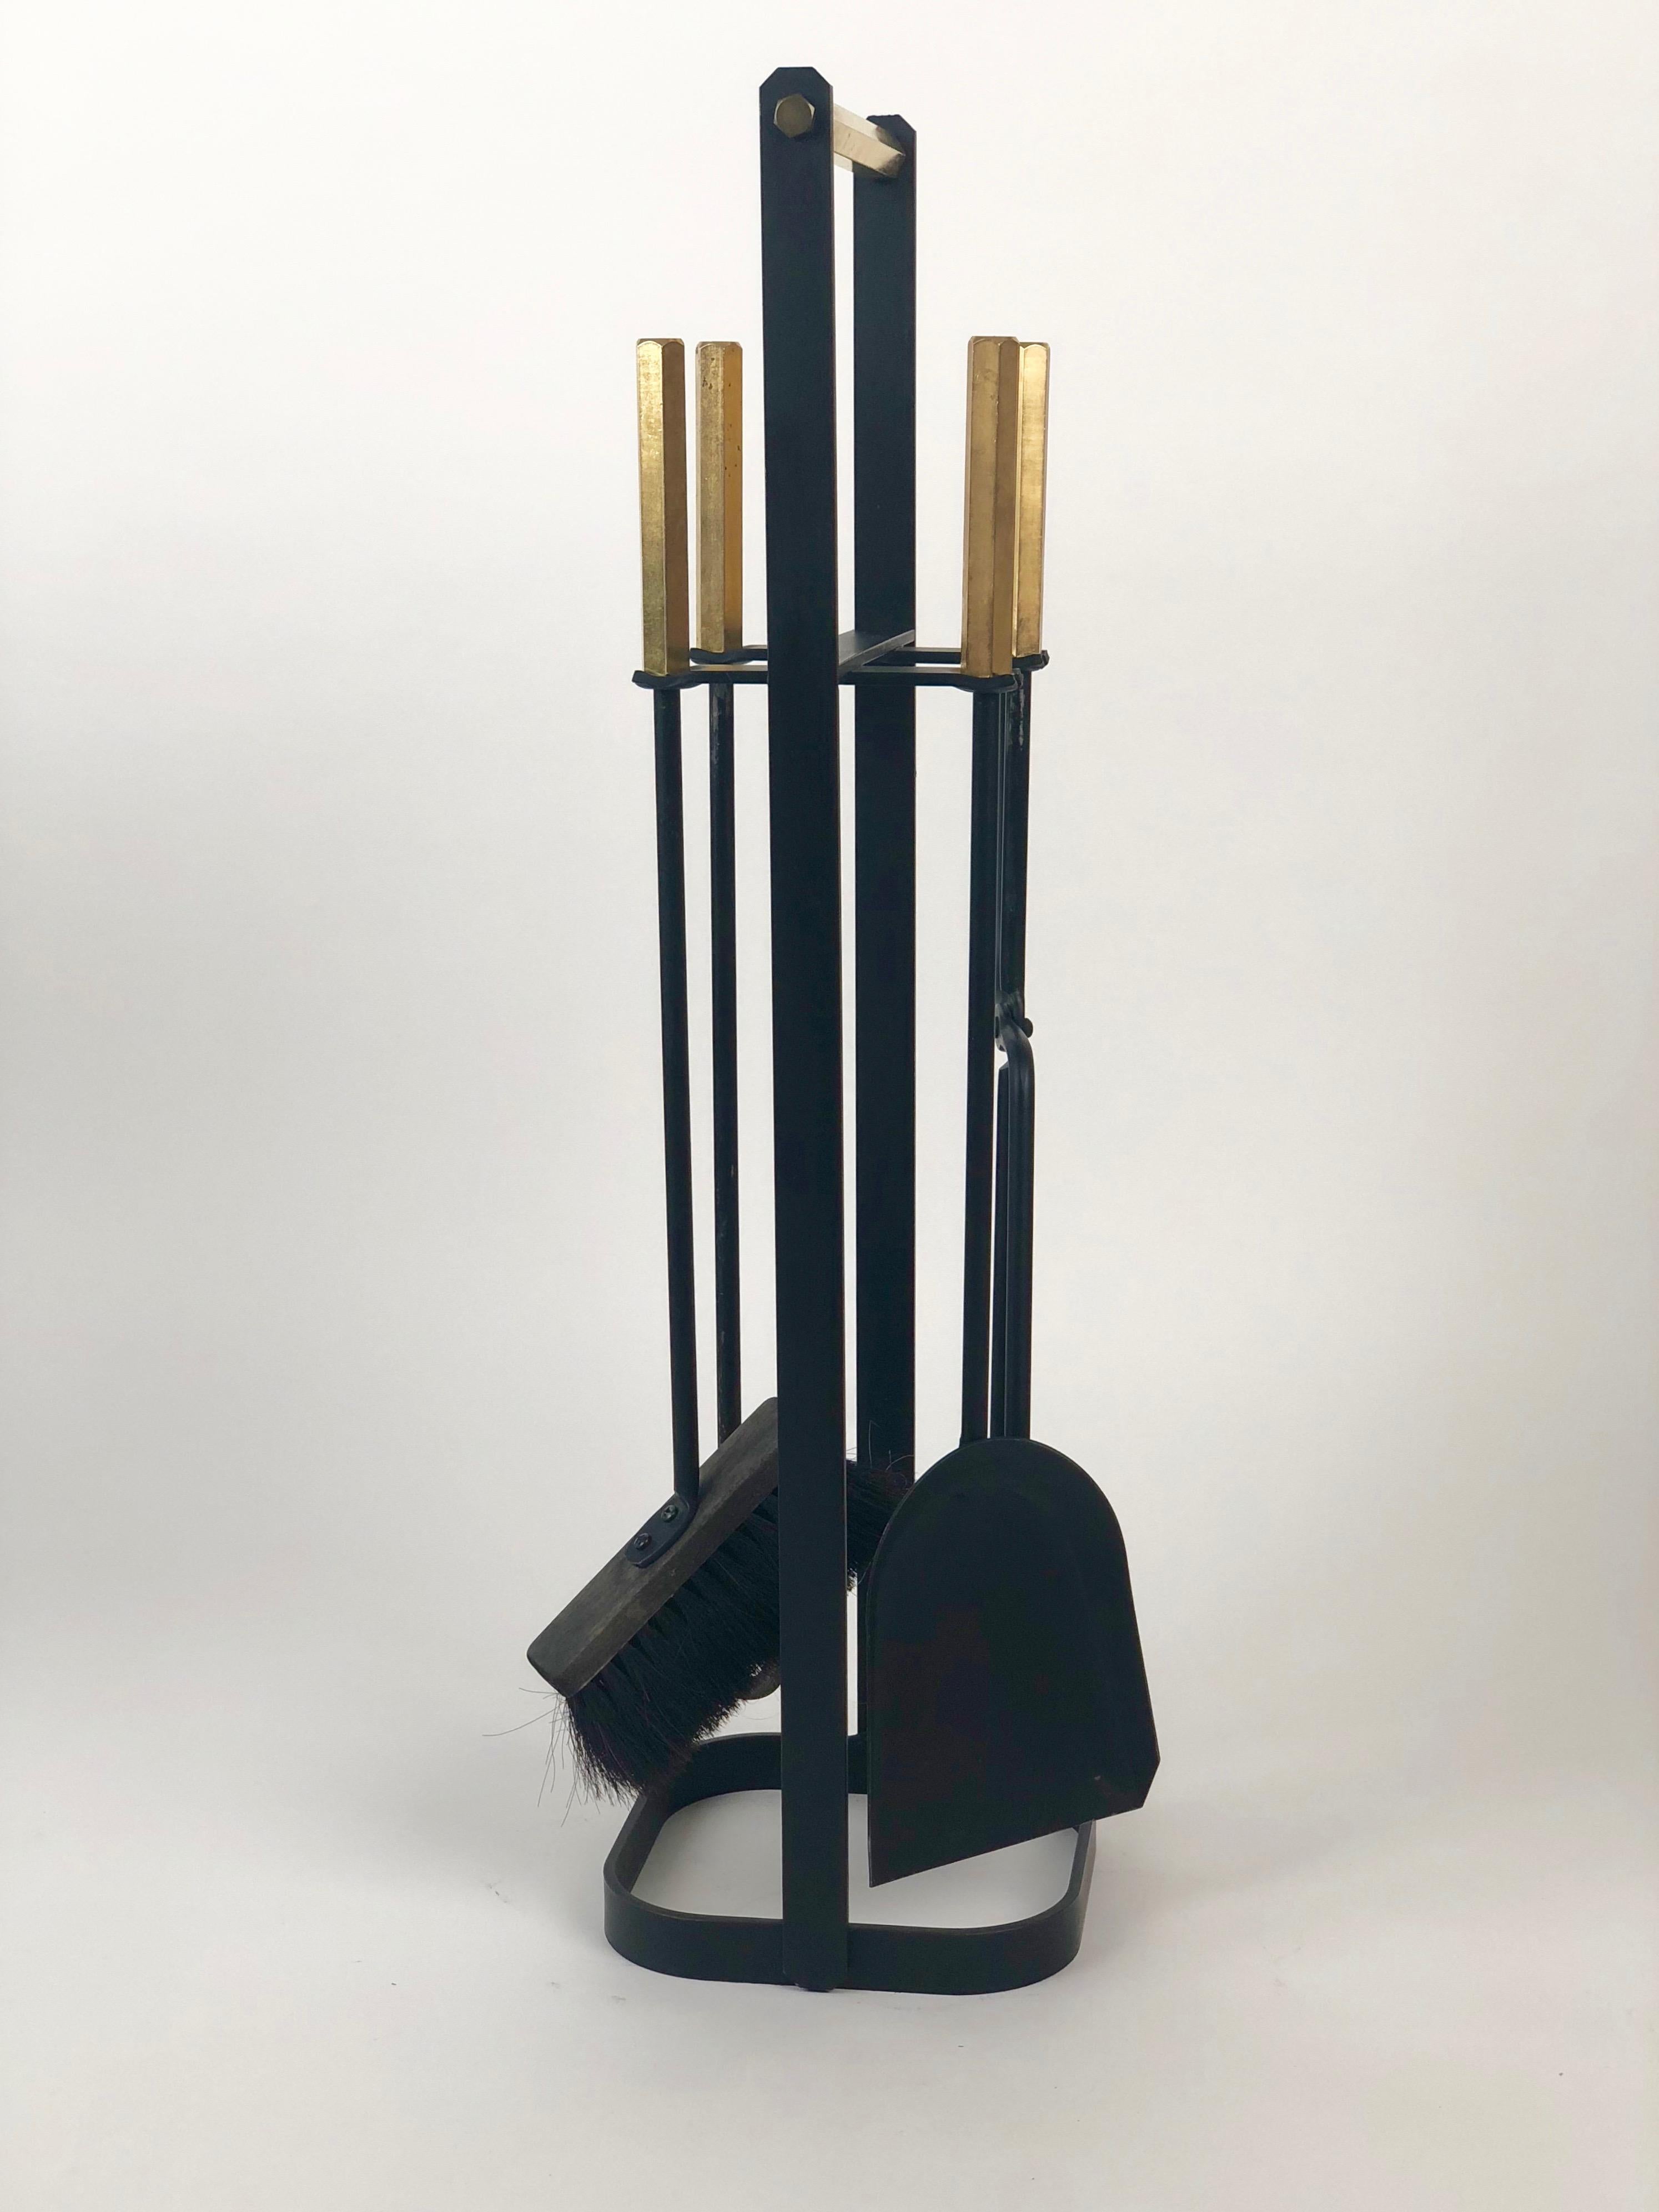 Austrian Midcentury, Wrought Iron Fireplace Tools with Brass Handles from the 1960s